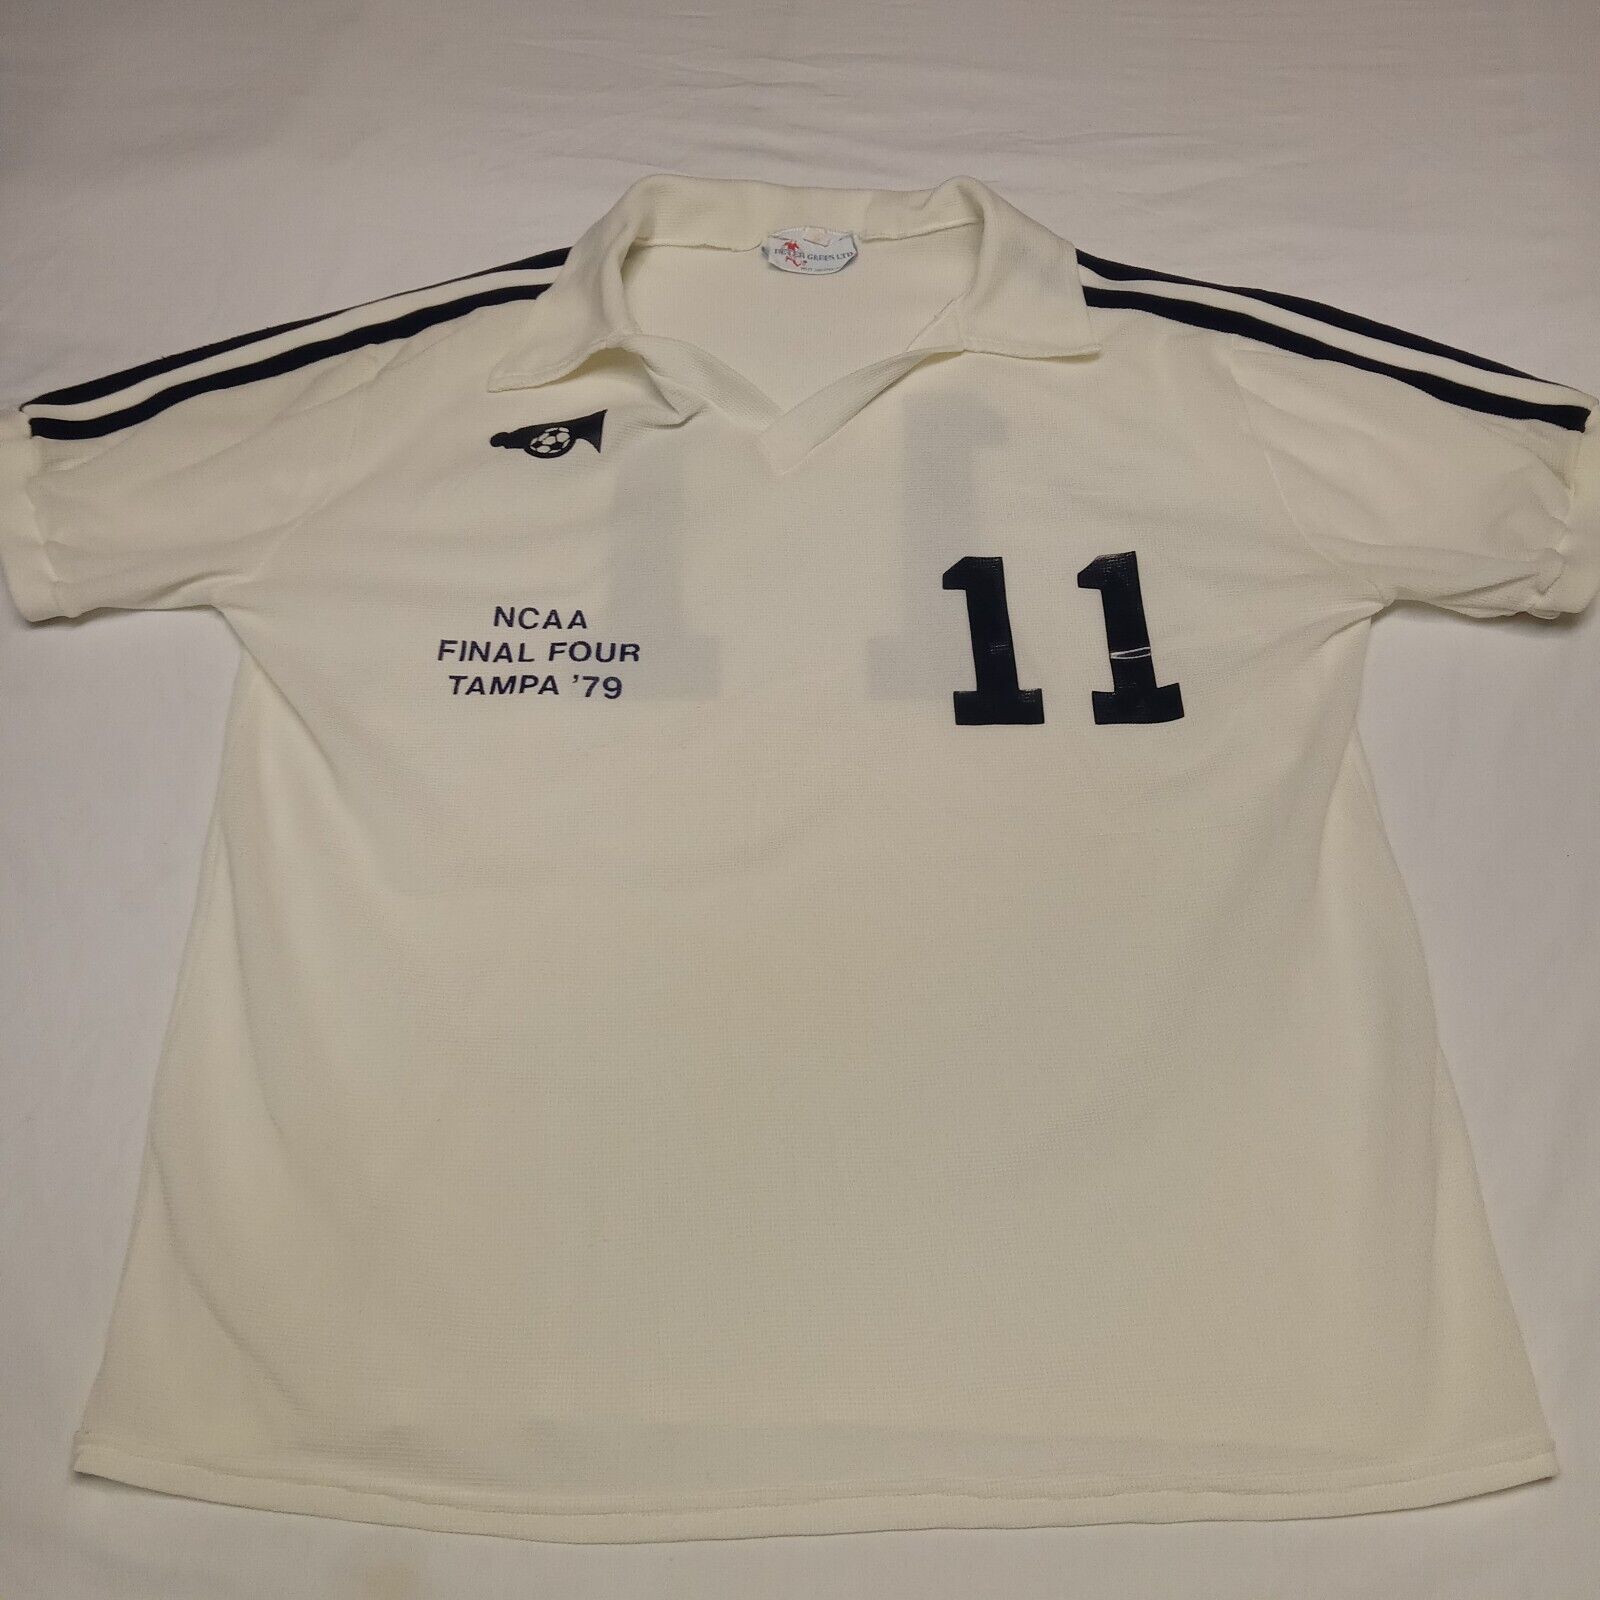 Vintage 70s Peter Green Soccer Jersey NCAA Final 4 Tampa Shirt Mens L White #11 